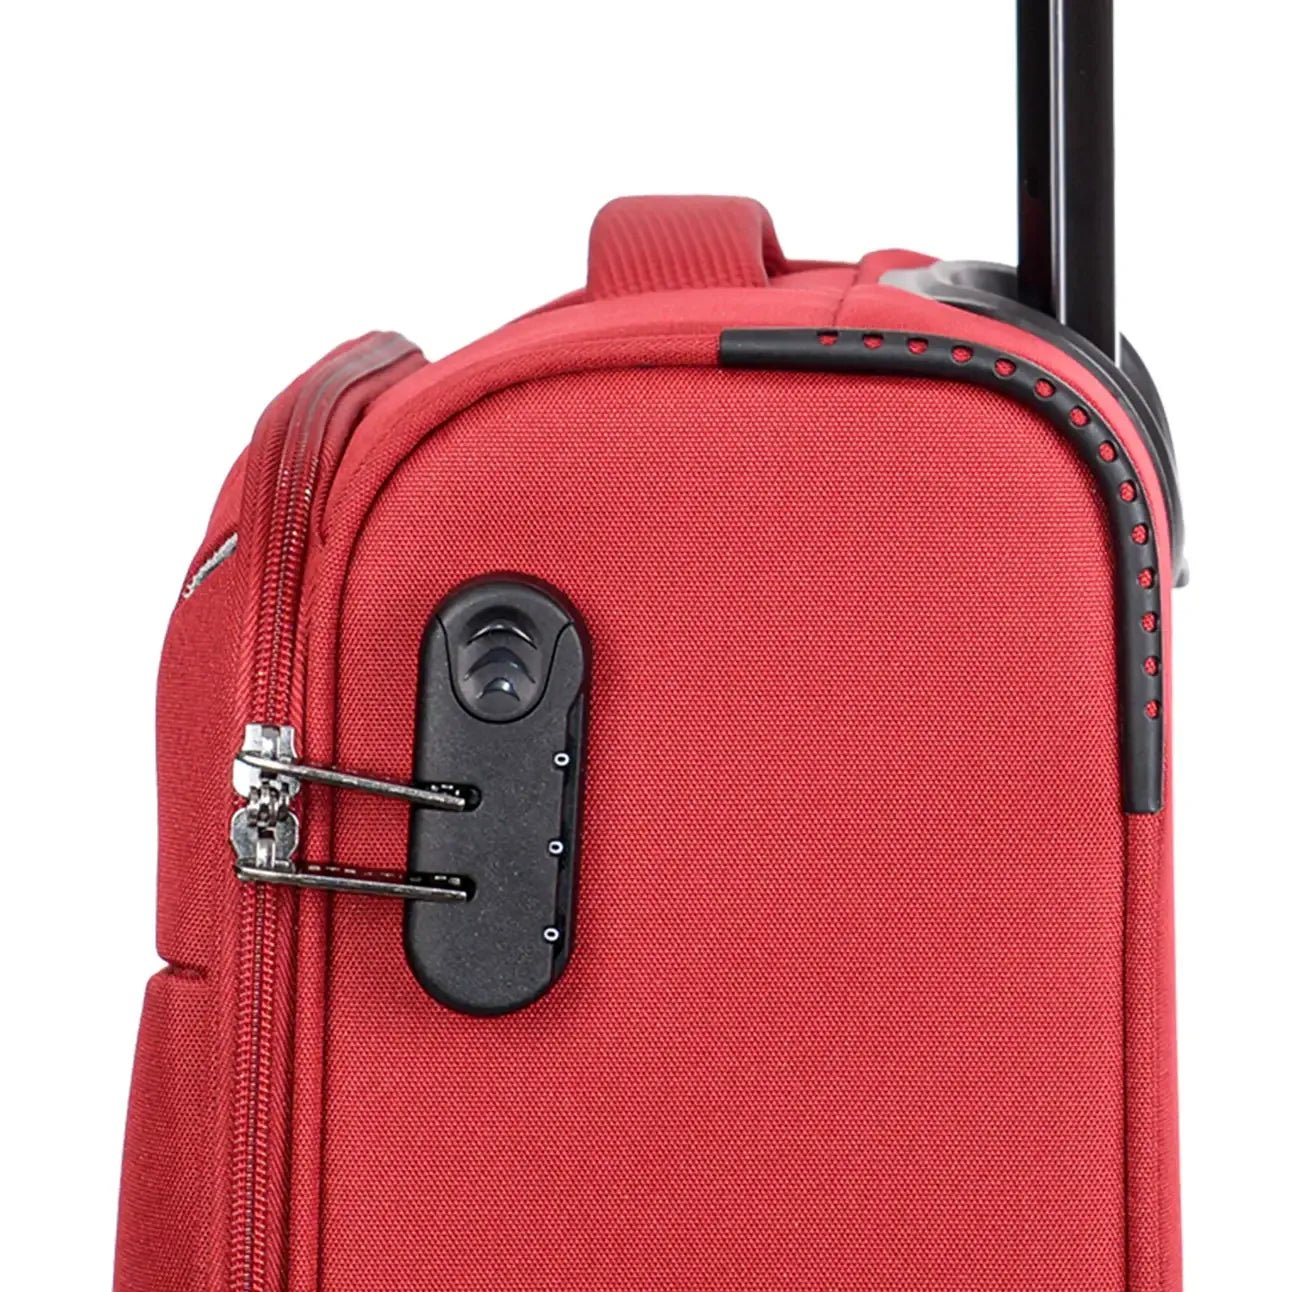 Valise cabine 4 roues Stratic Strong 55 cm - pétrole